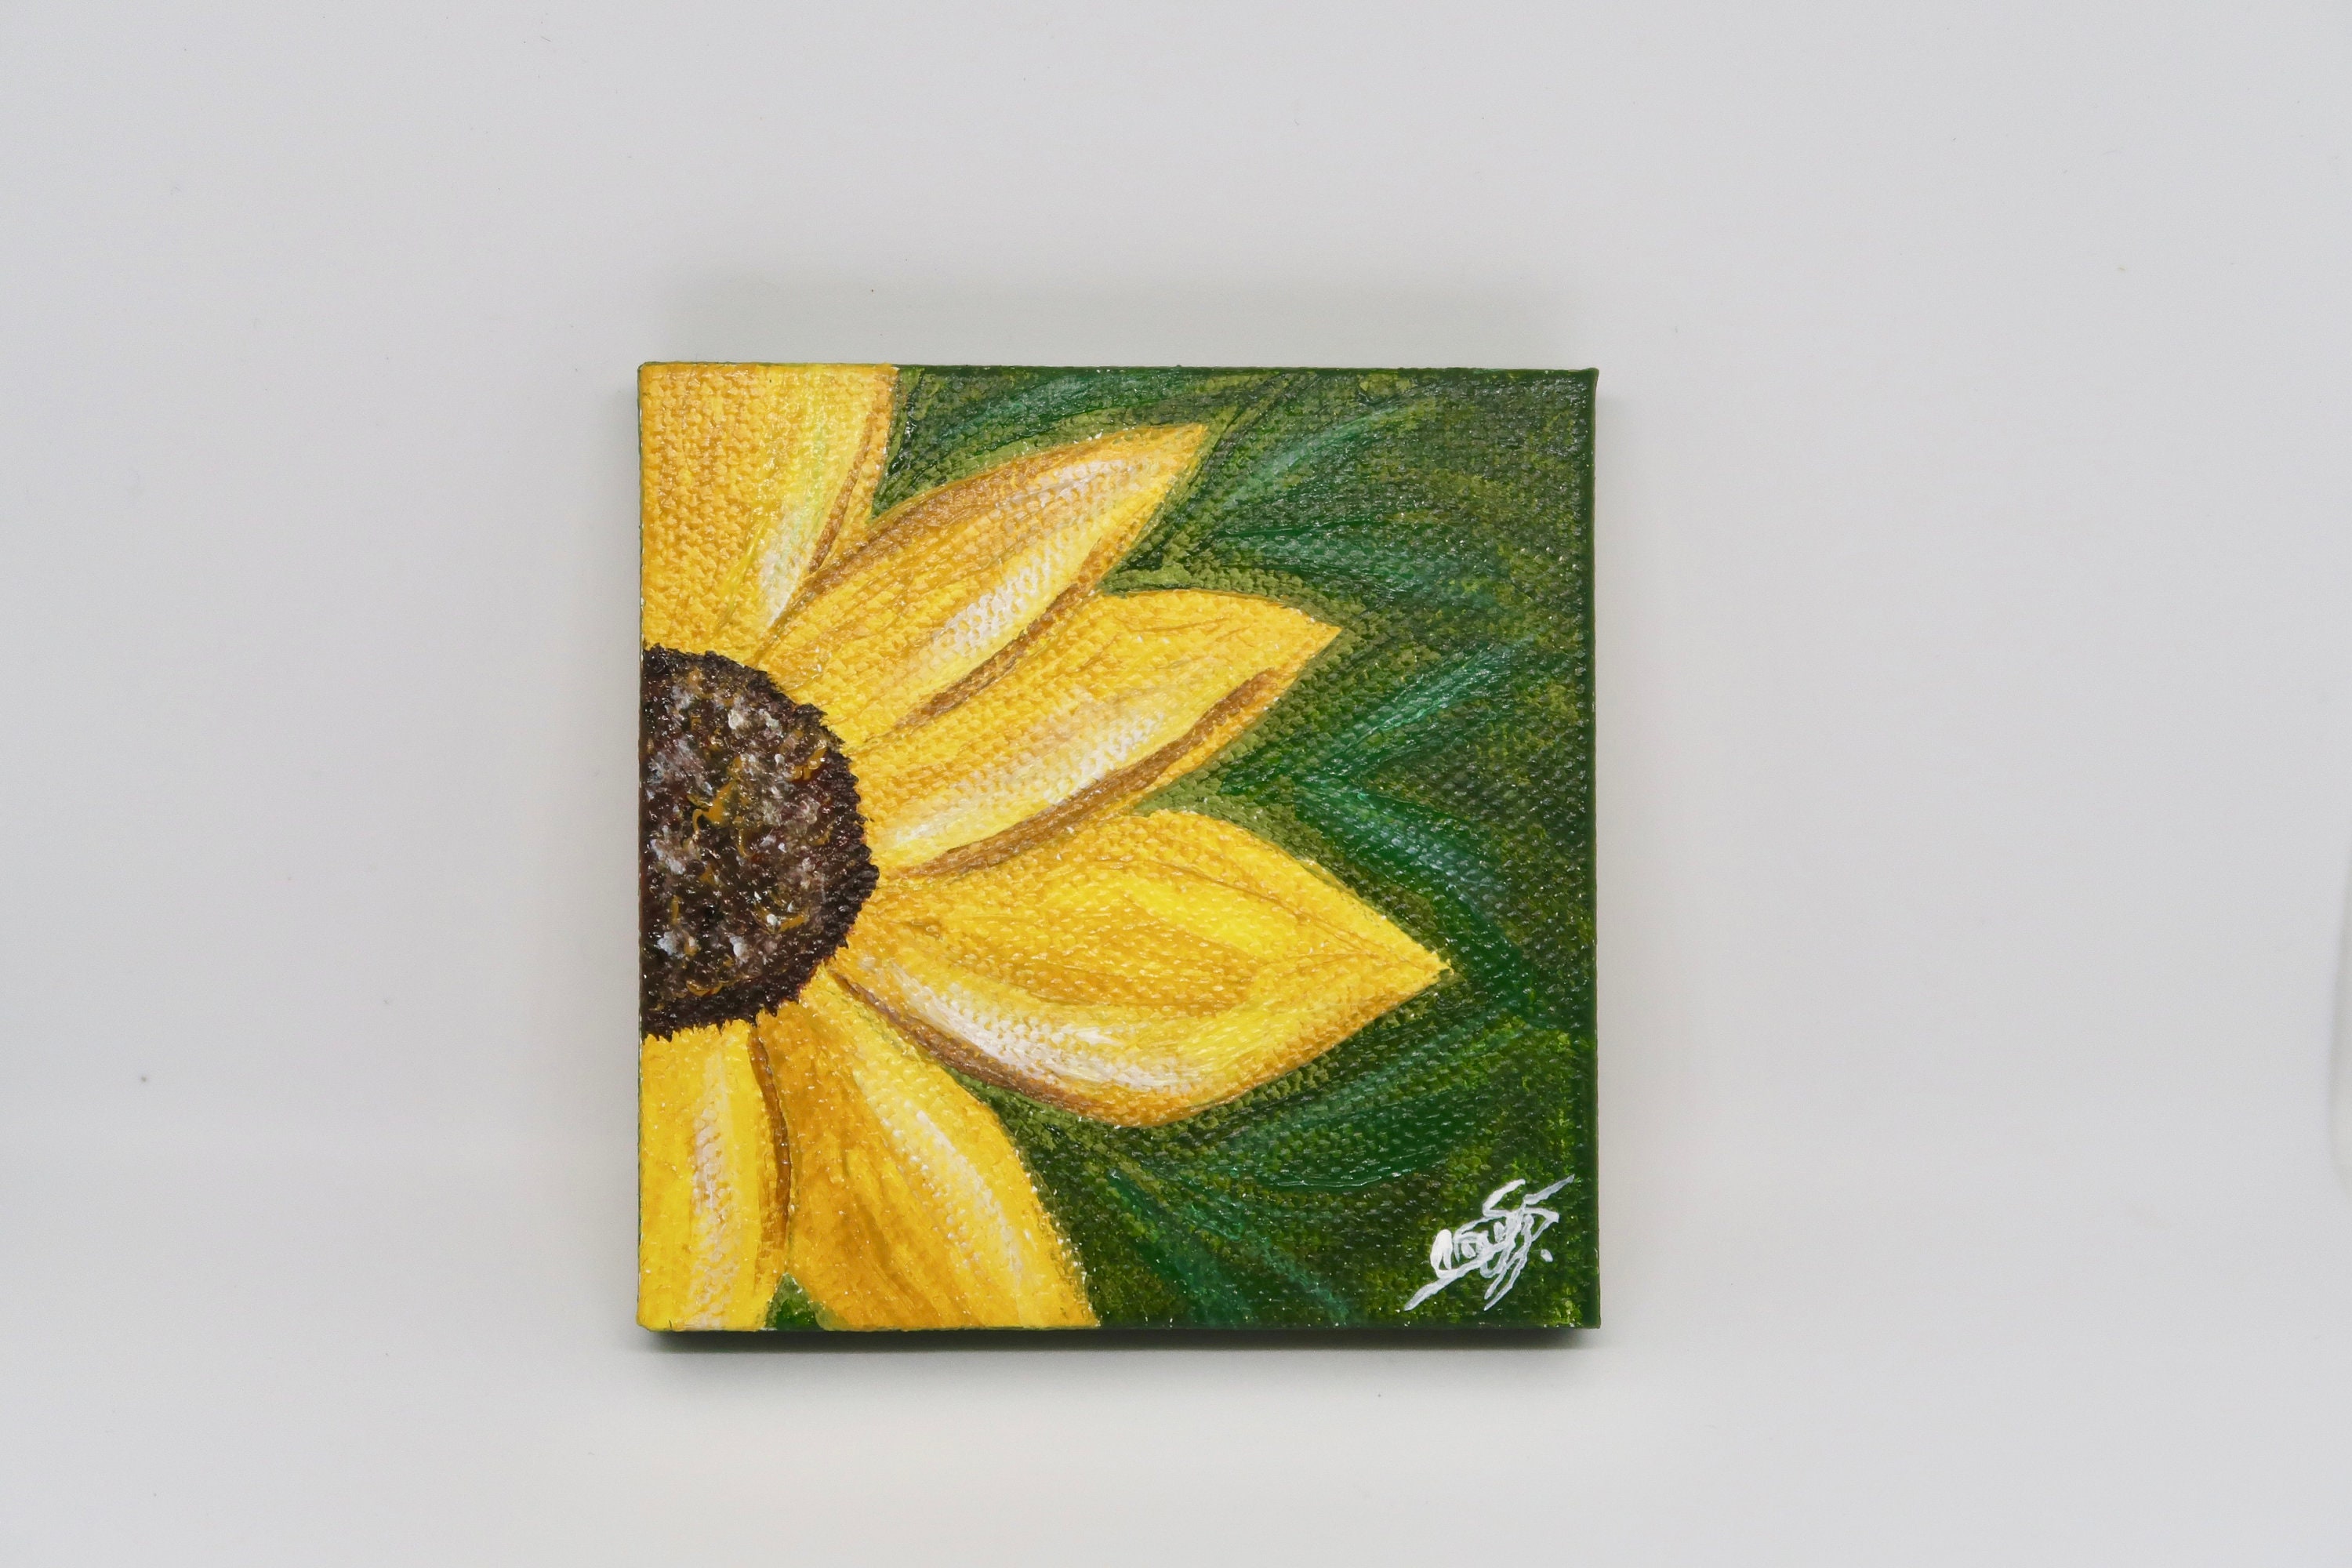 Mini Canvas 3x3 Acrylic Painting With Easel Sunflower Flowers Bring Joy  Prophetic Painting Original Art 